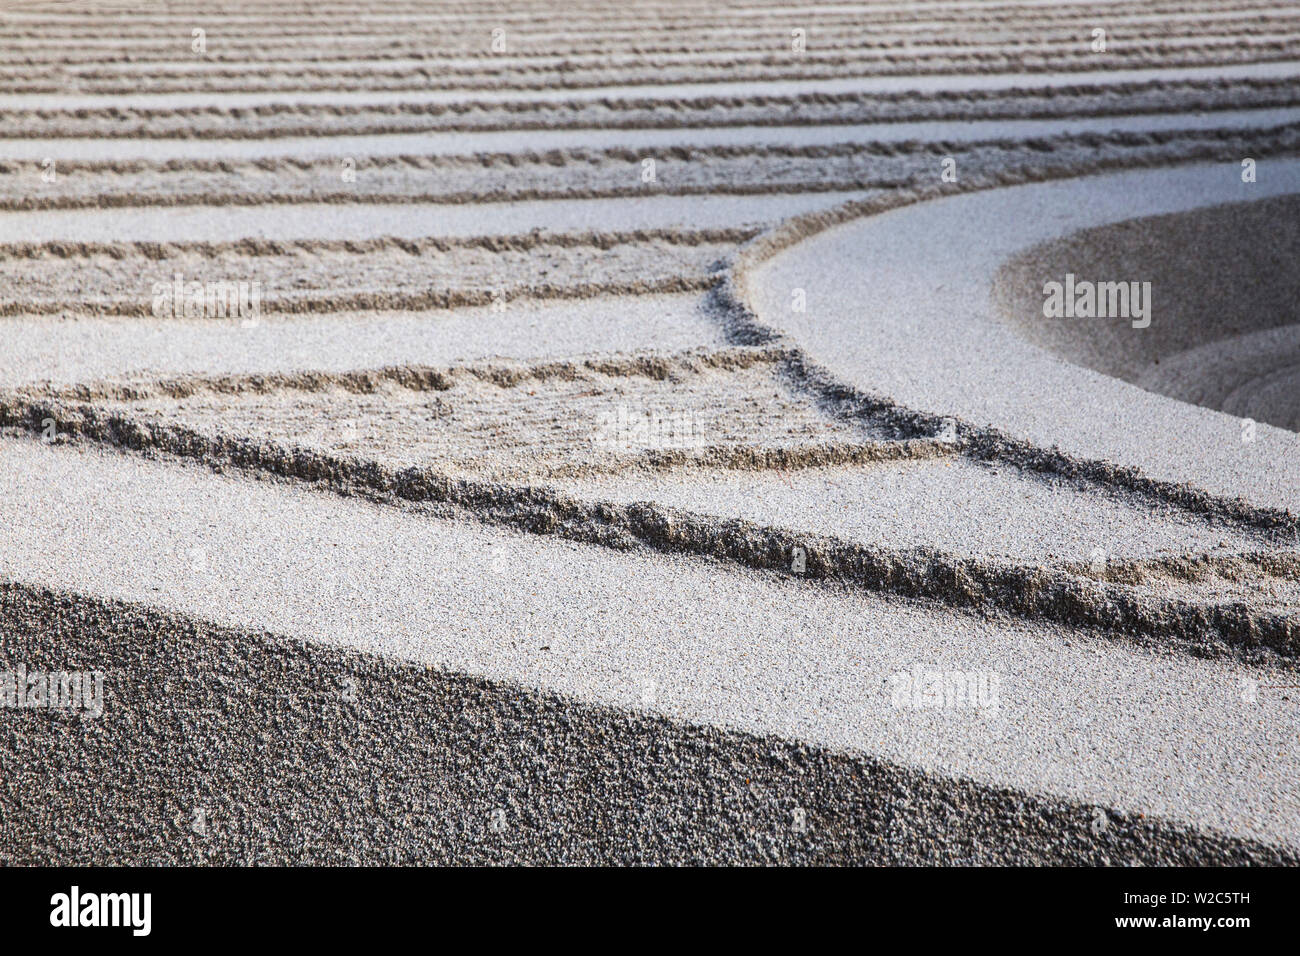 Japan, Kyoto, Ginkakuji Temple - A World Heritage Site, Dry sand garden known as the Sea of Silver Sand Stock Photo